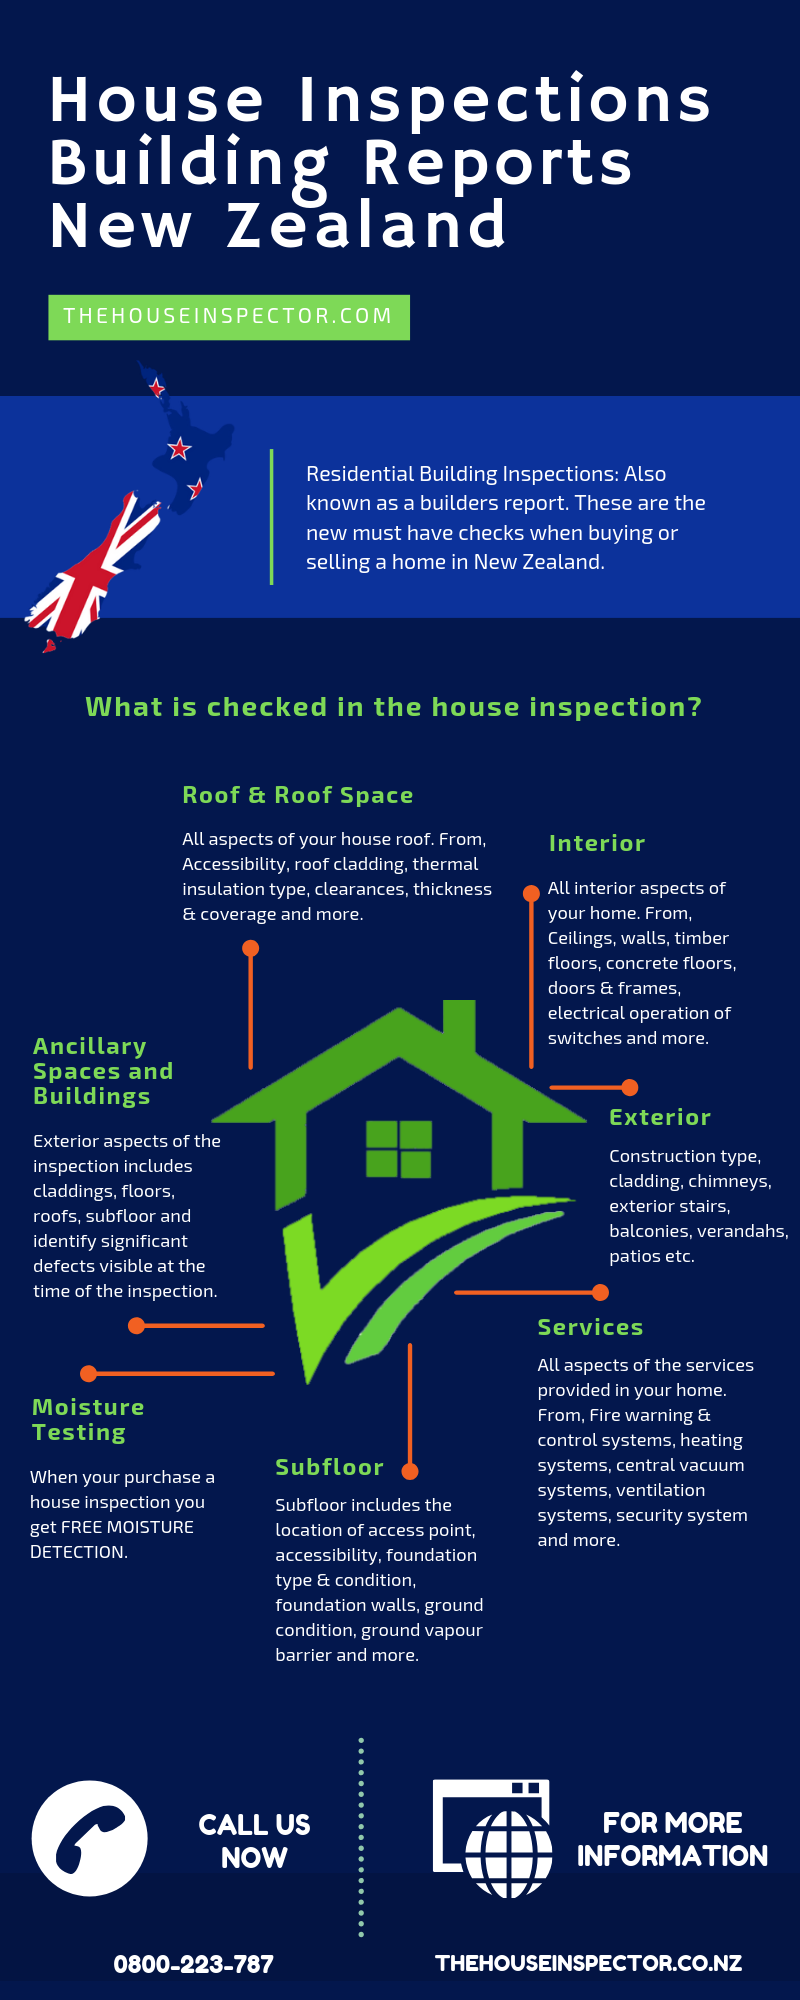 House Inspections Building Reports New Zealand